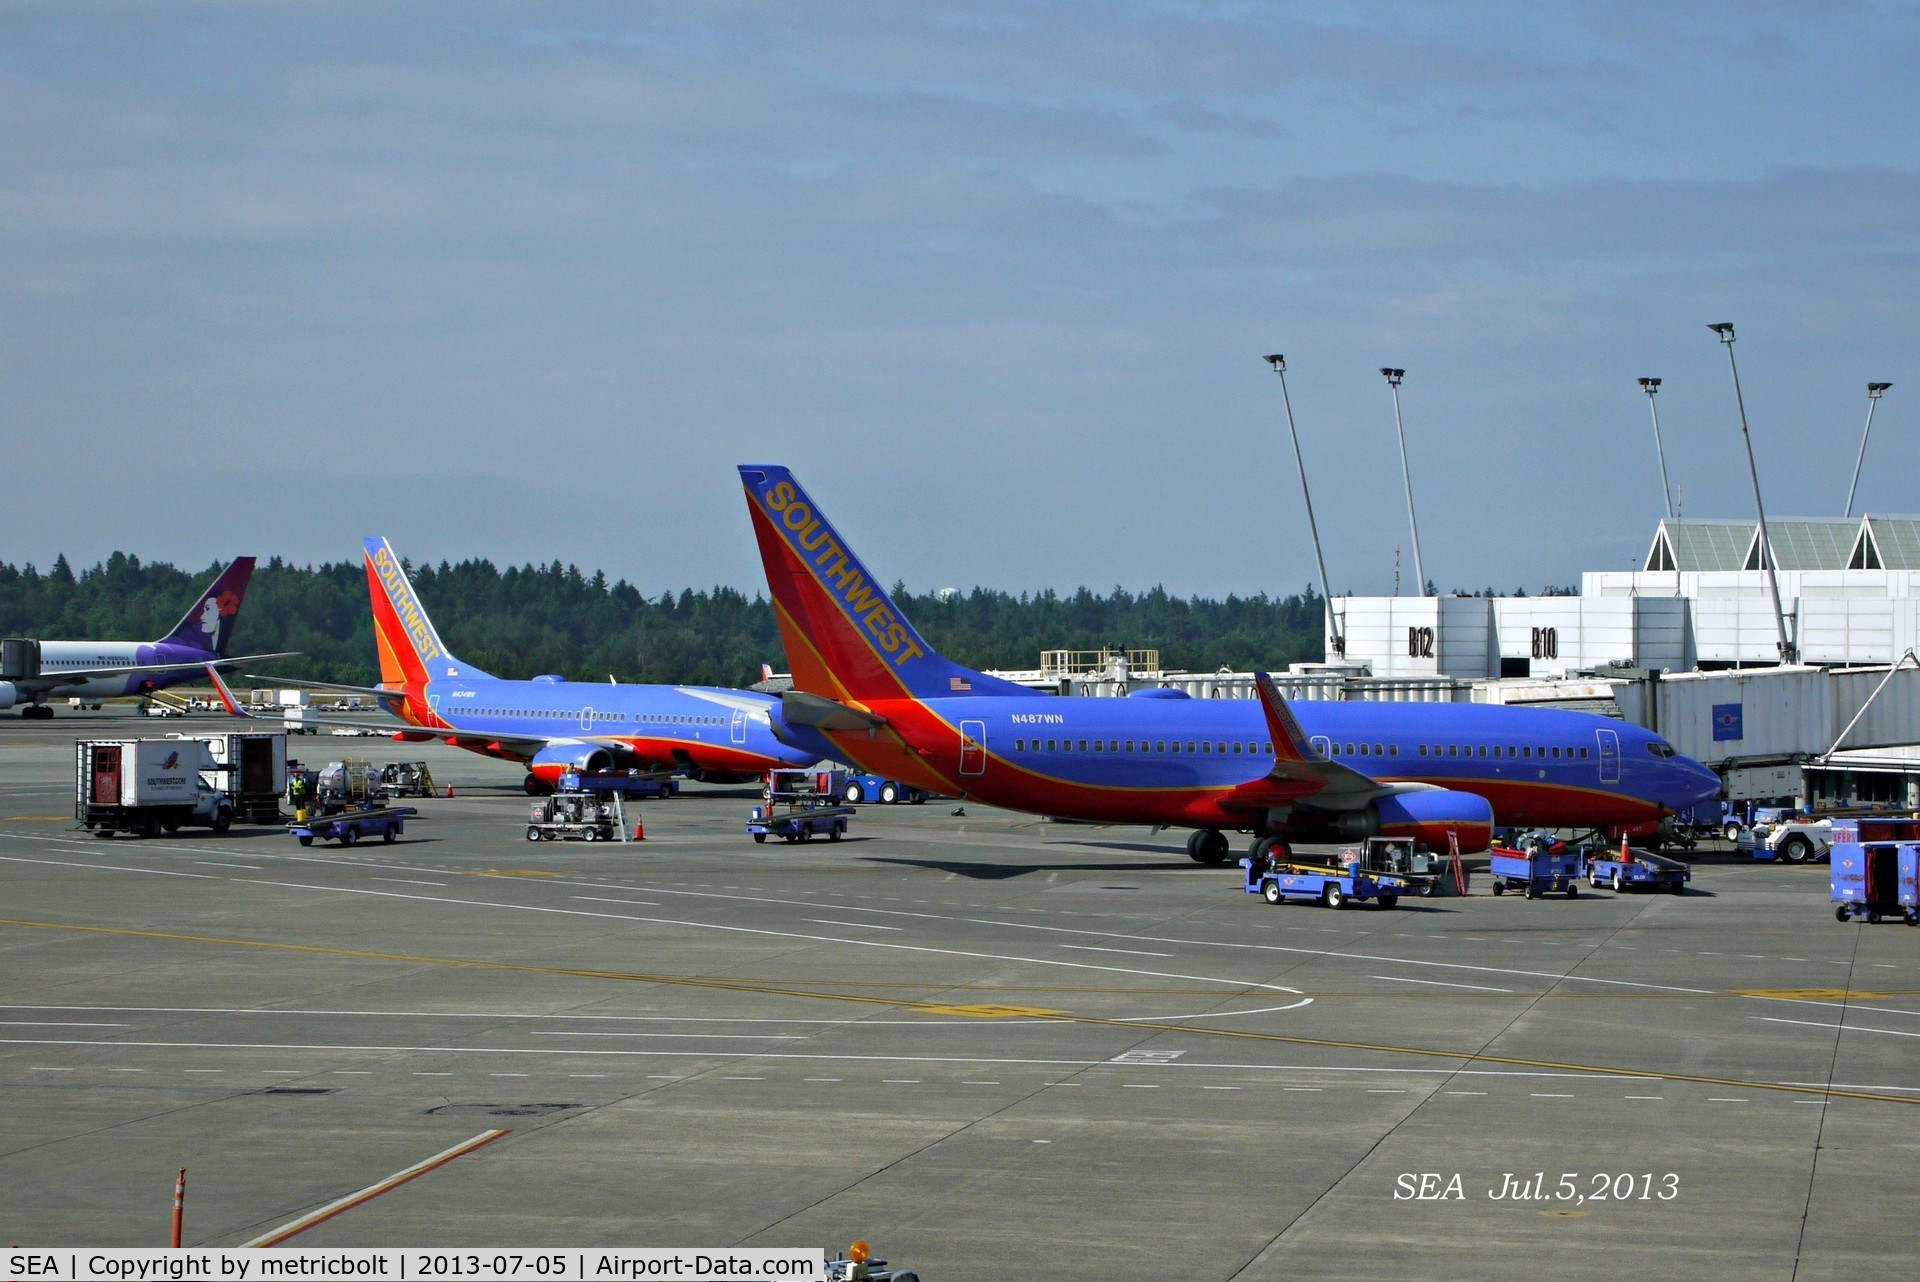 Seattle-tacoma International Airport (SEA) - Southwest at the gate